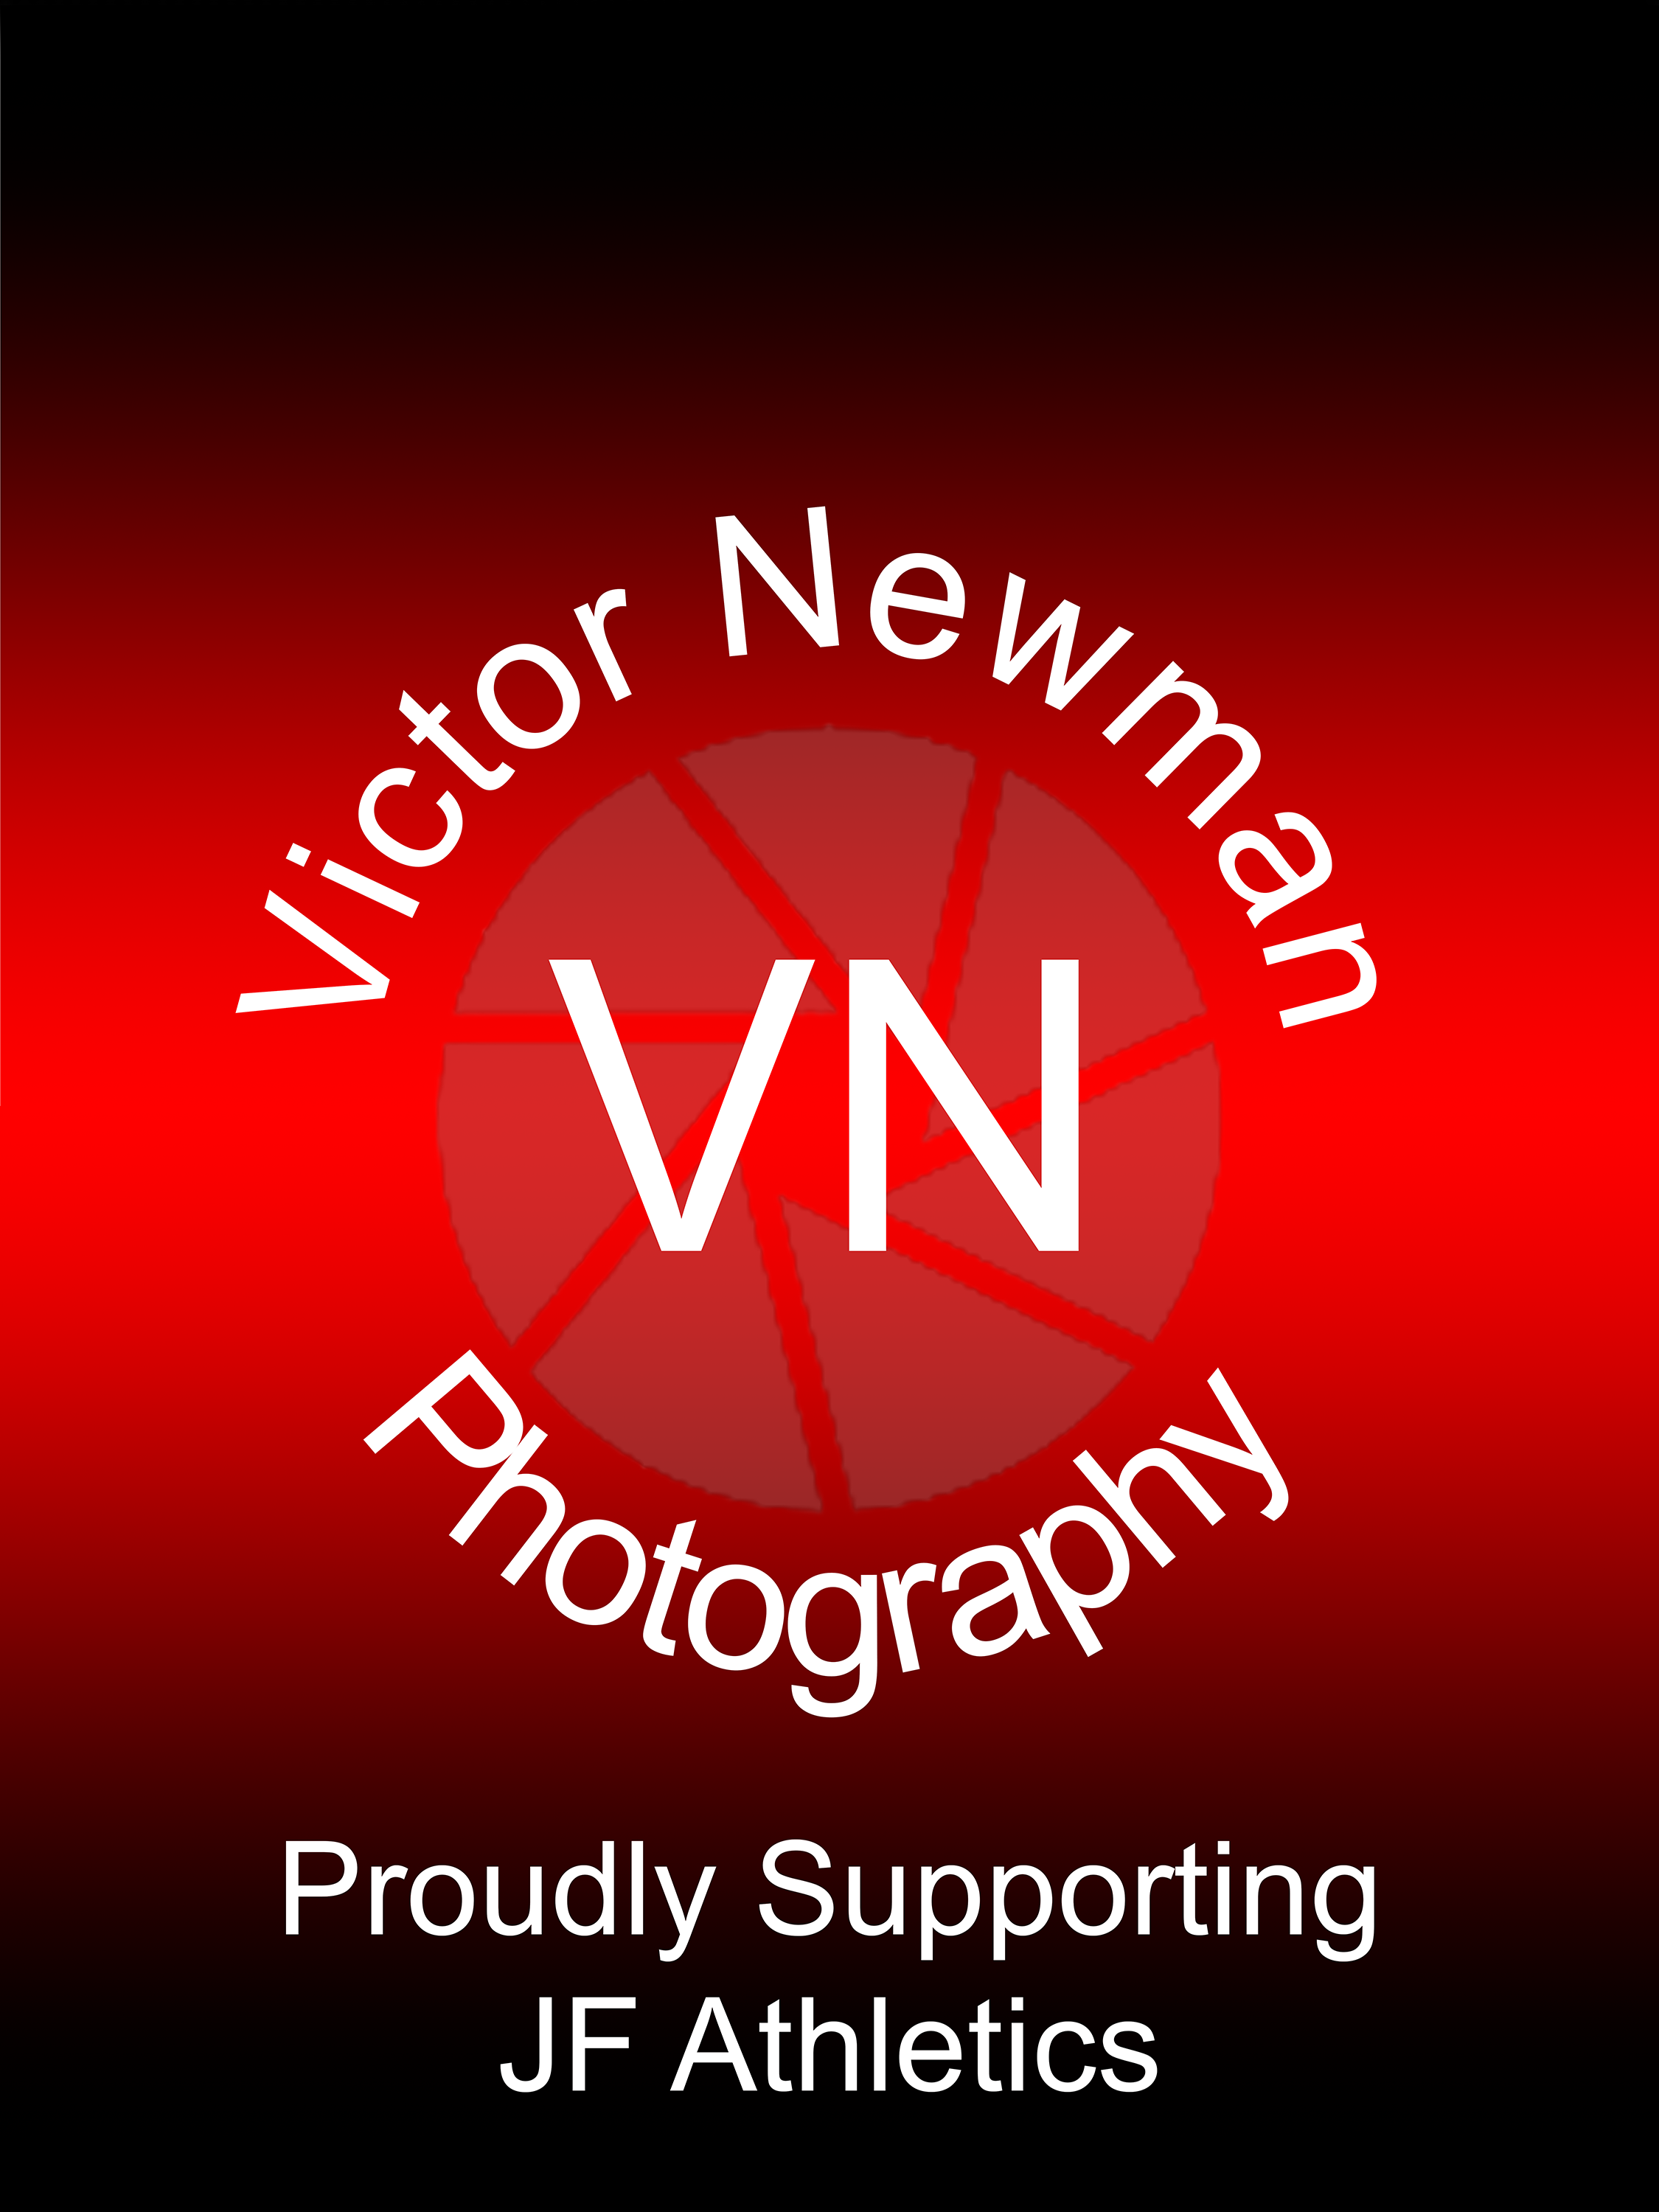 Victor Newman Photography media guide 1 layer.png